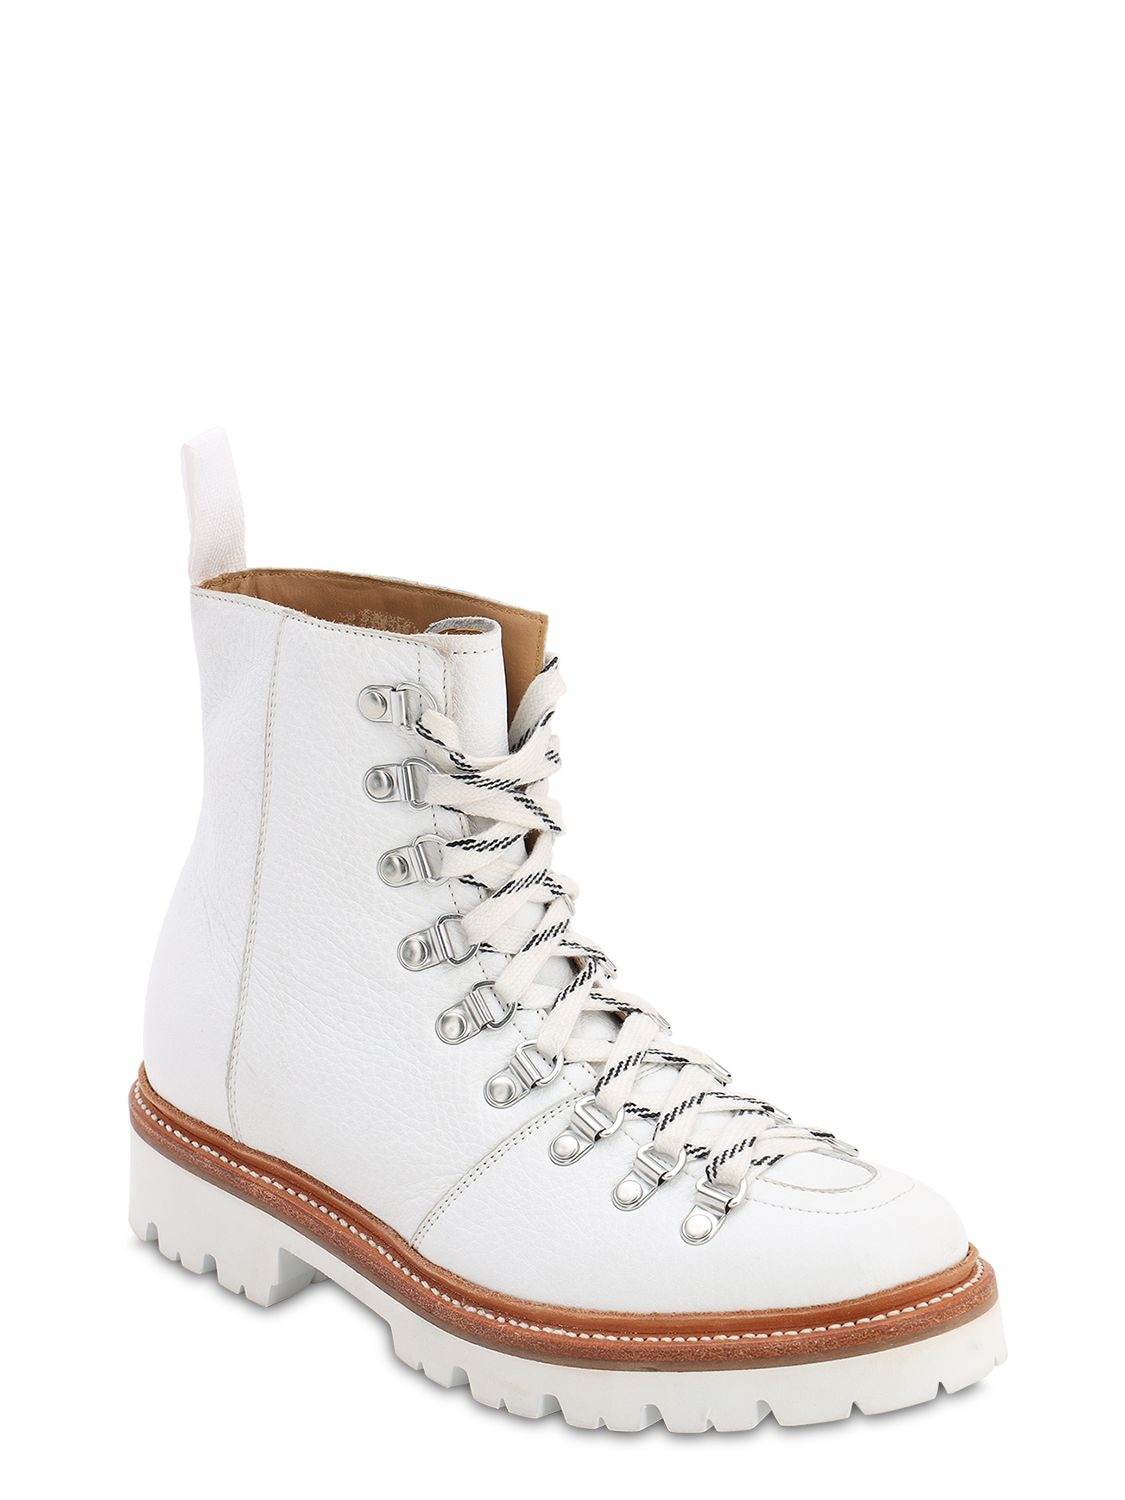 Grenson 35mm Nanette Leather Hiking Boots In White | ModeSens